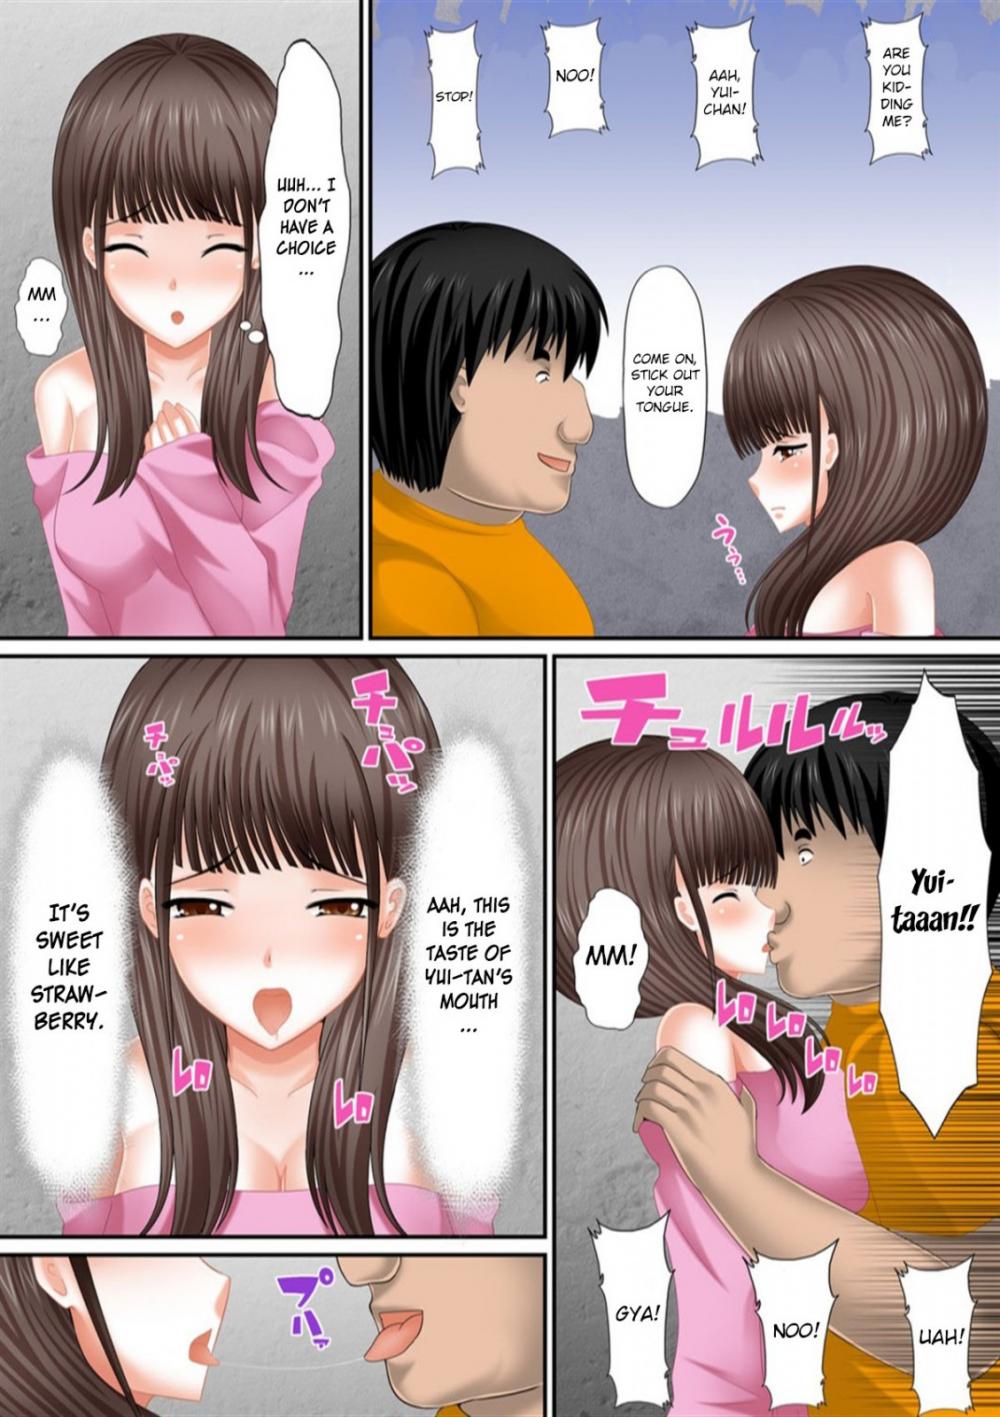 Girls Mauhwa Sex - Licence to Breed as Much as You Want! ~Instantly Forcing Cute Girls to Have  Sex~-Chapter 1-Hentai Manga Hentai Comic - Page: 15 - Online porn video at  mobile